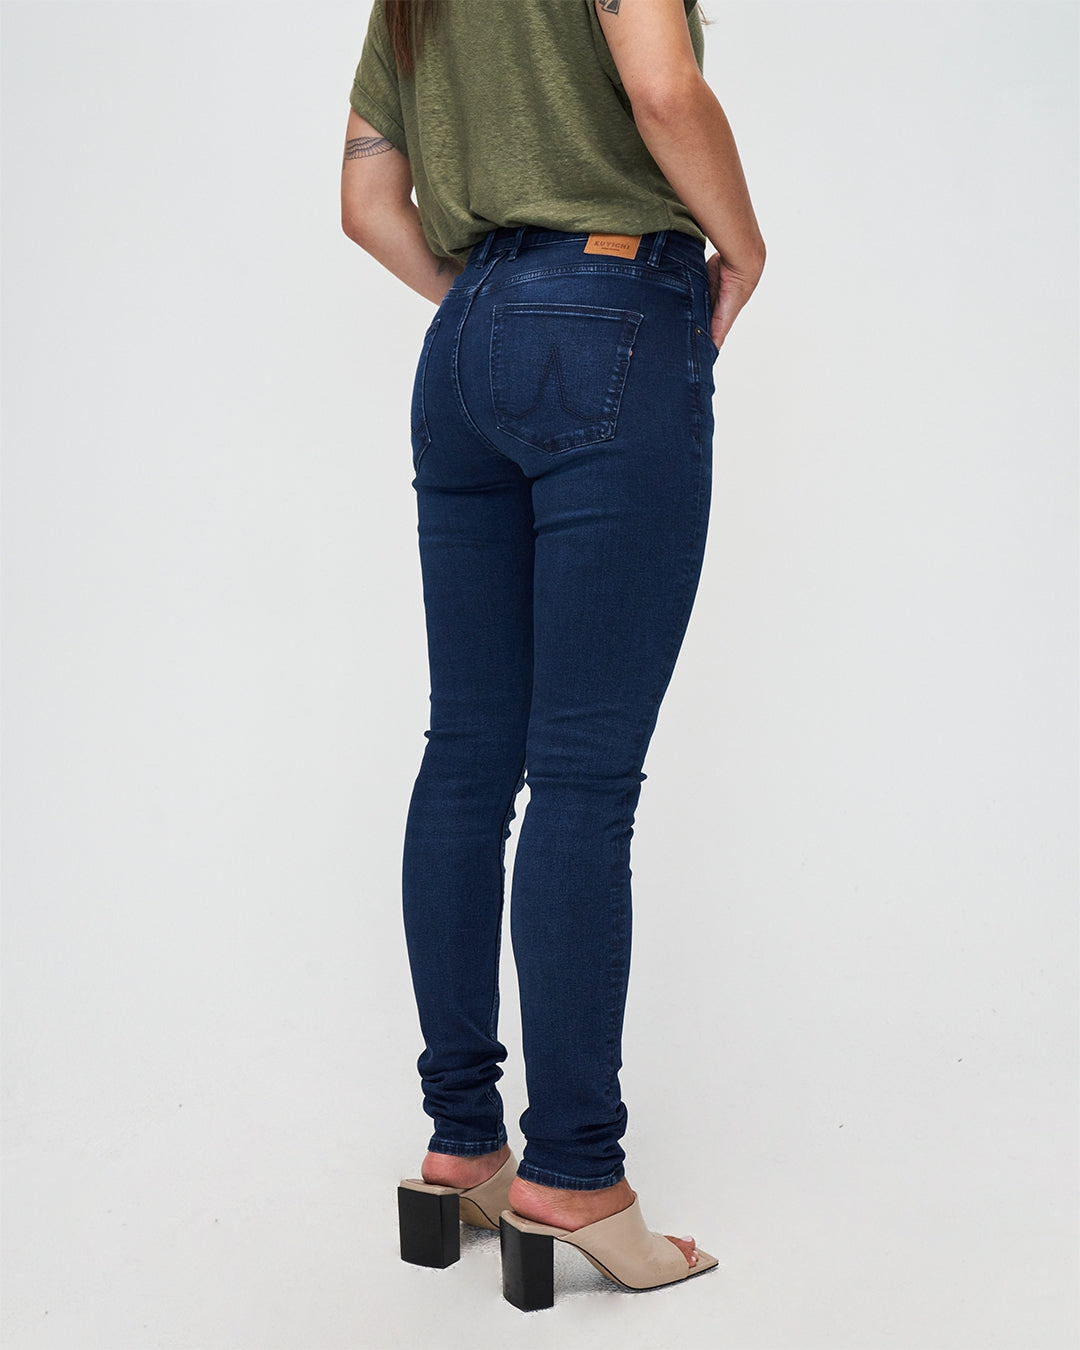 Carey Skinny jeans in true blue made from organic cotton by Kuyichi